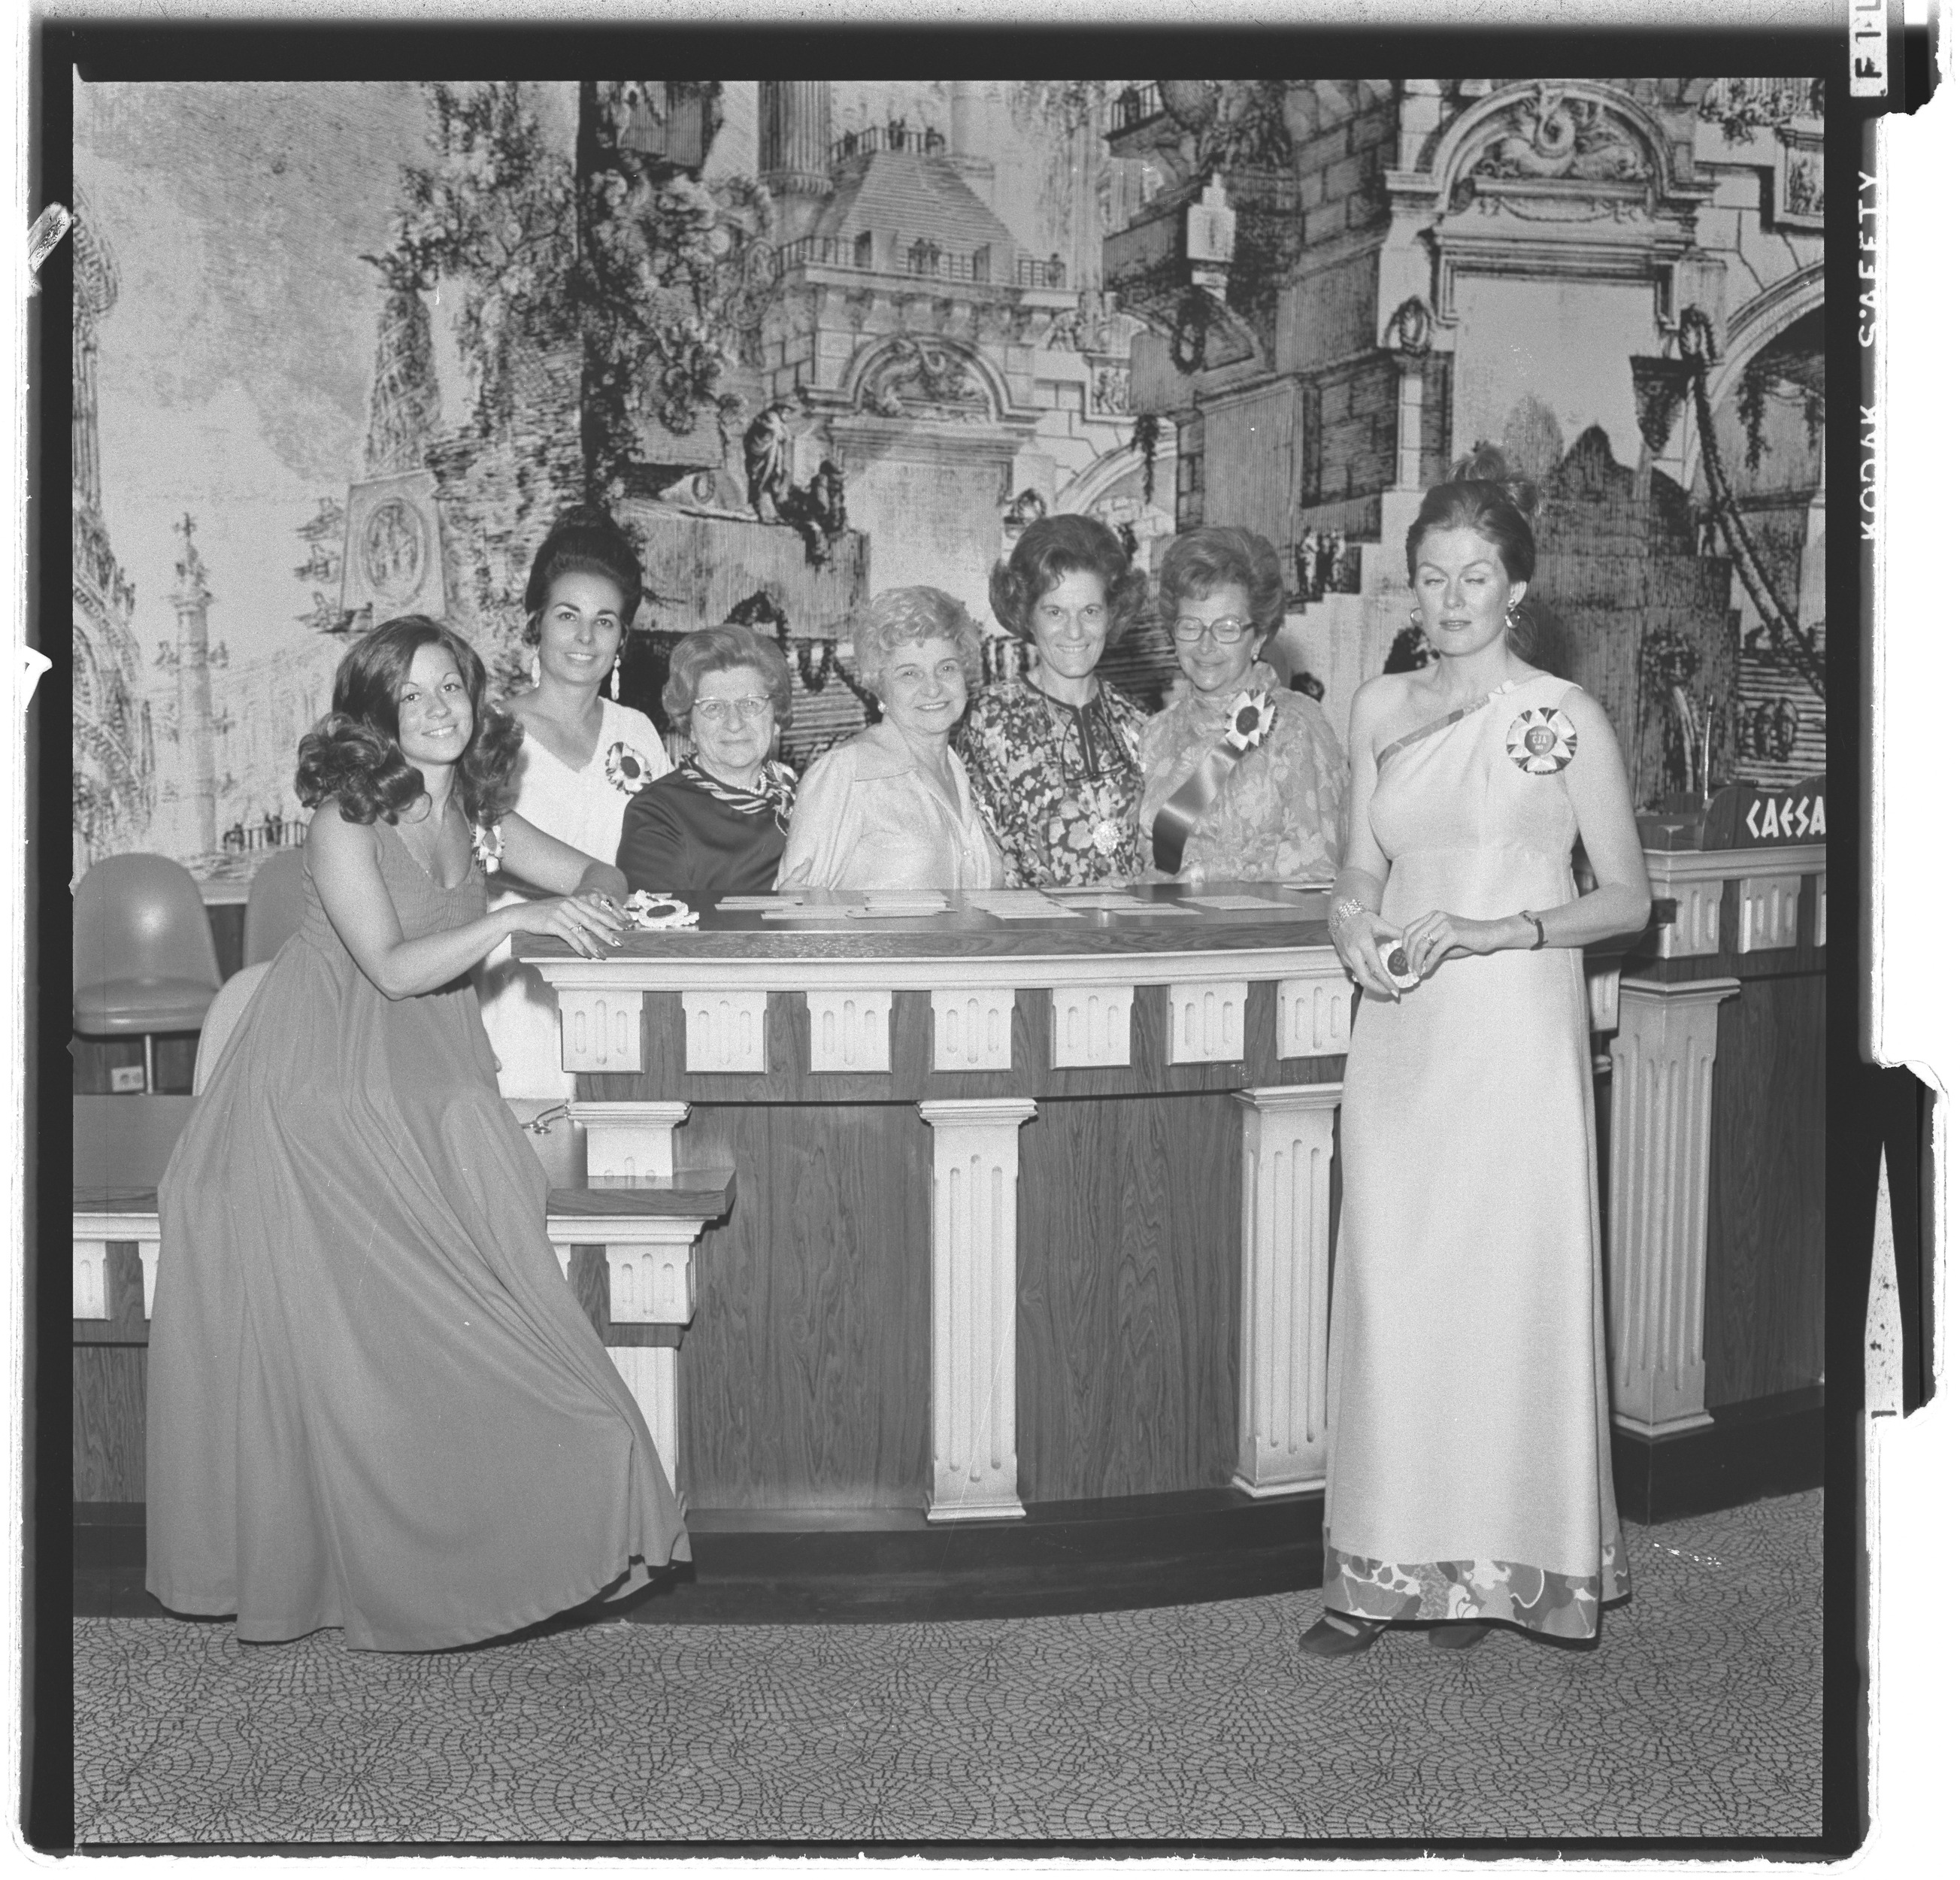 Photographs of Combined Jewish Appeal (Cocktail Party at Caesars Palace, Red Skelton), image 15